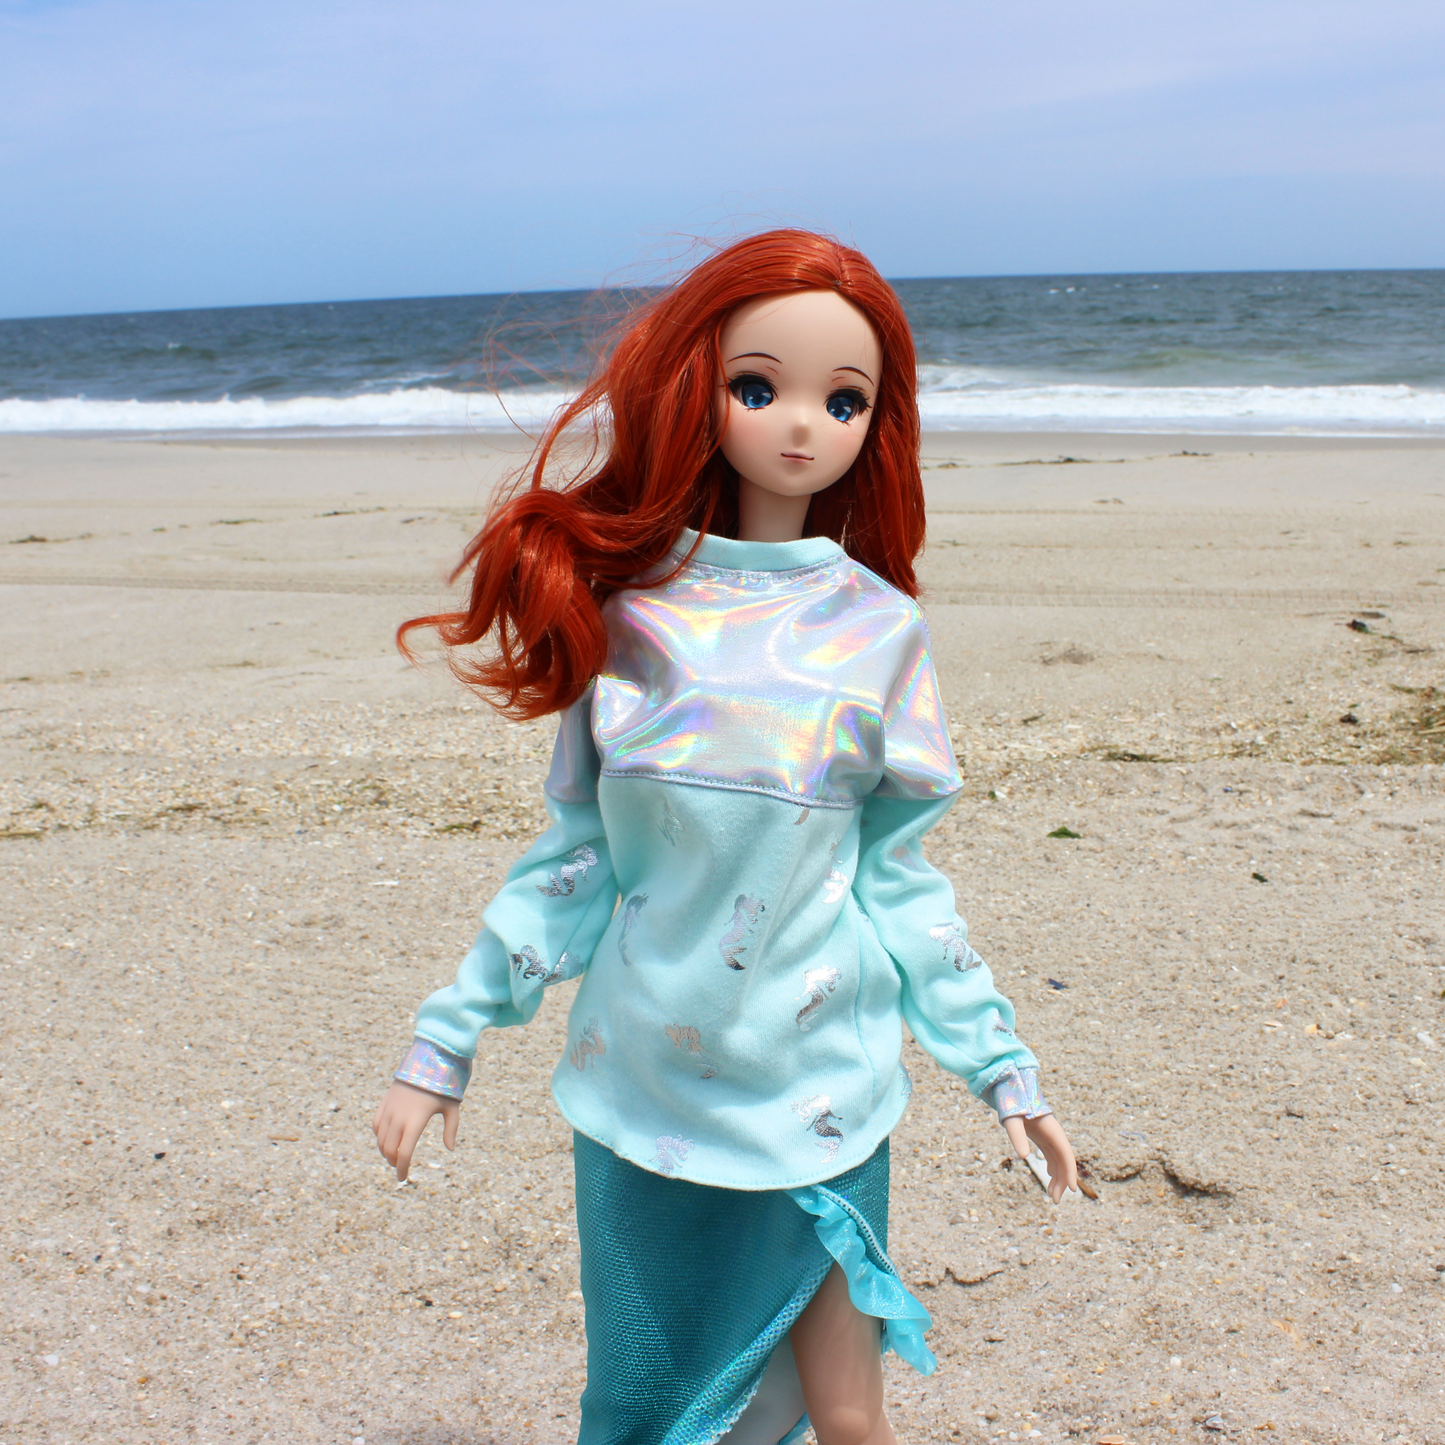 Mermaid Princessbound Holographic Hype Jersey - The Doll Fairy